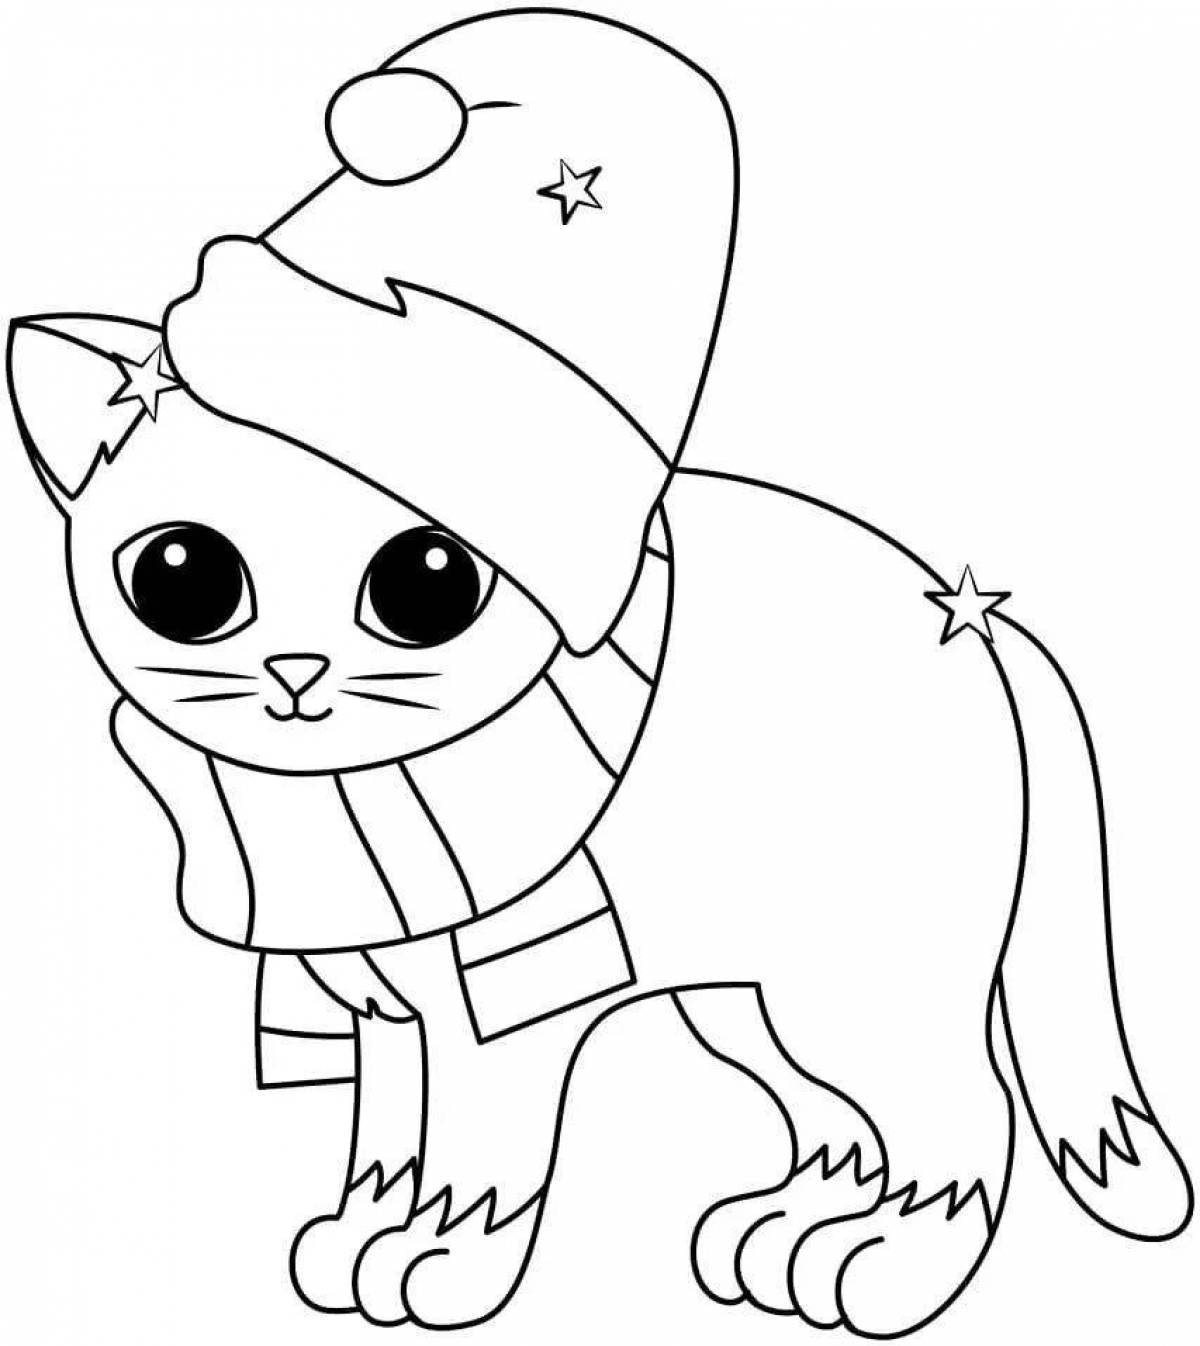 Smart cat coloring pages for boys